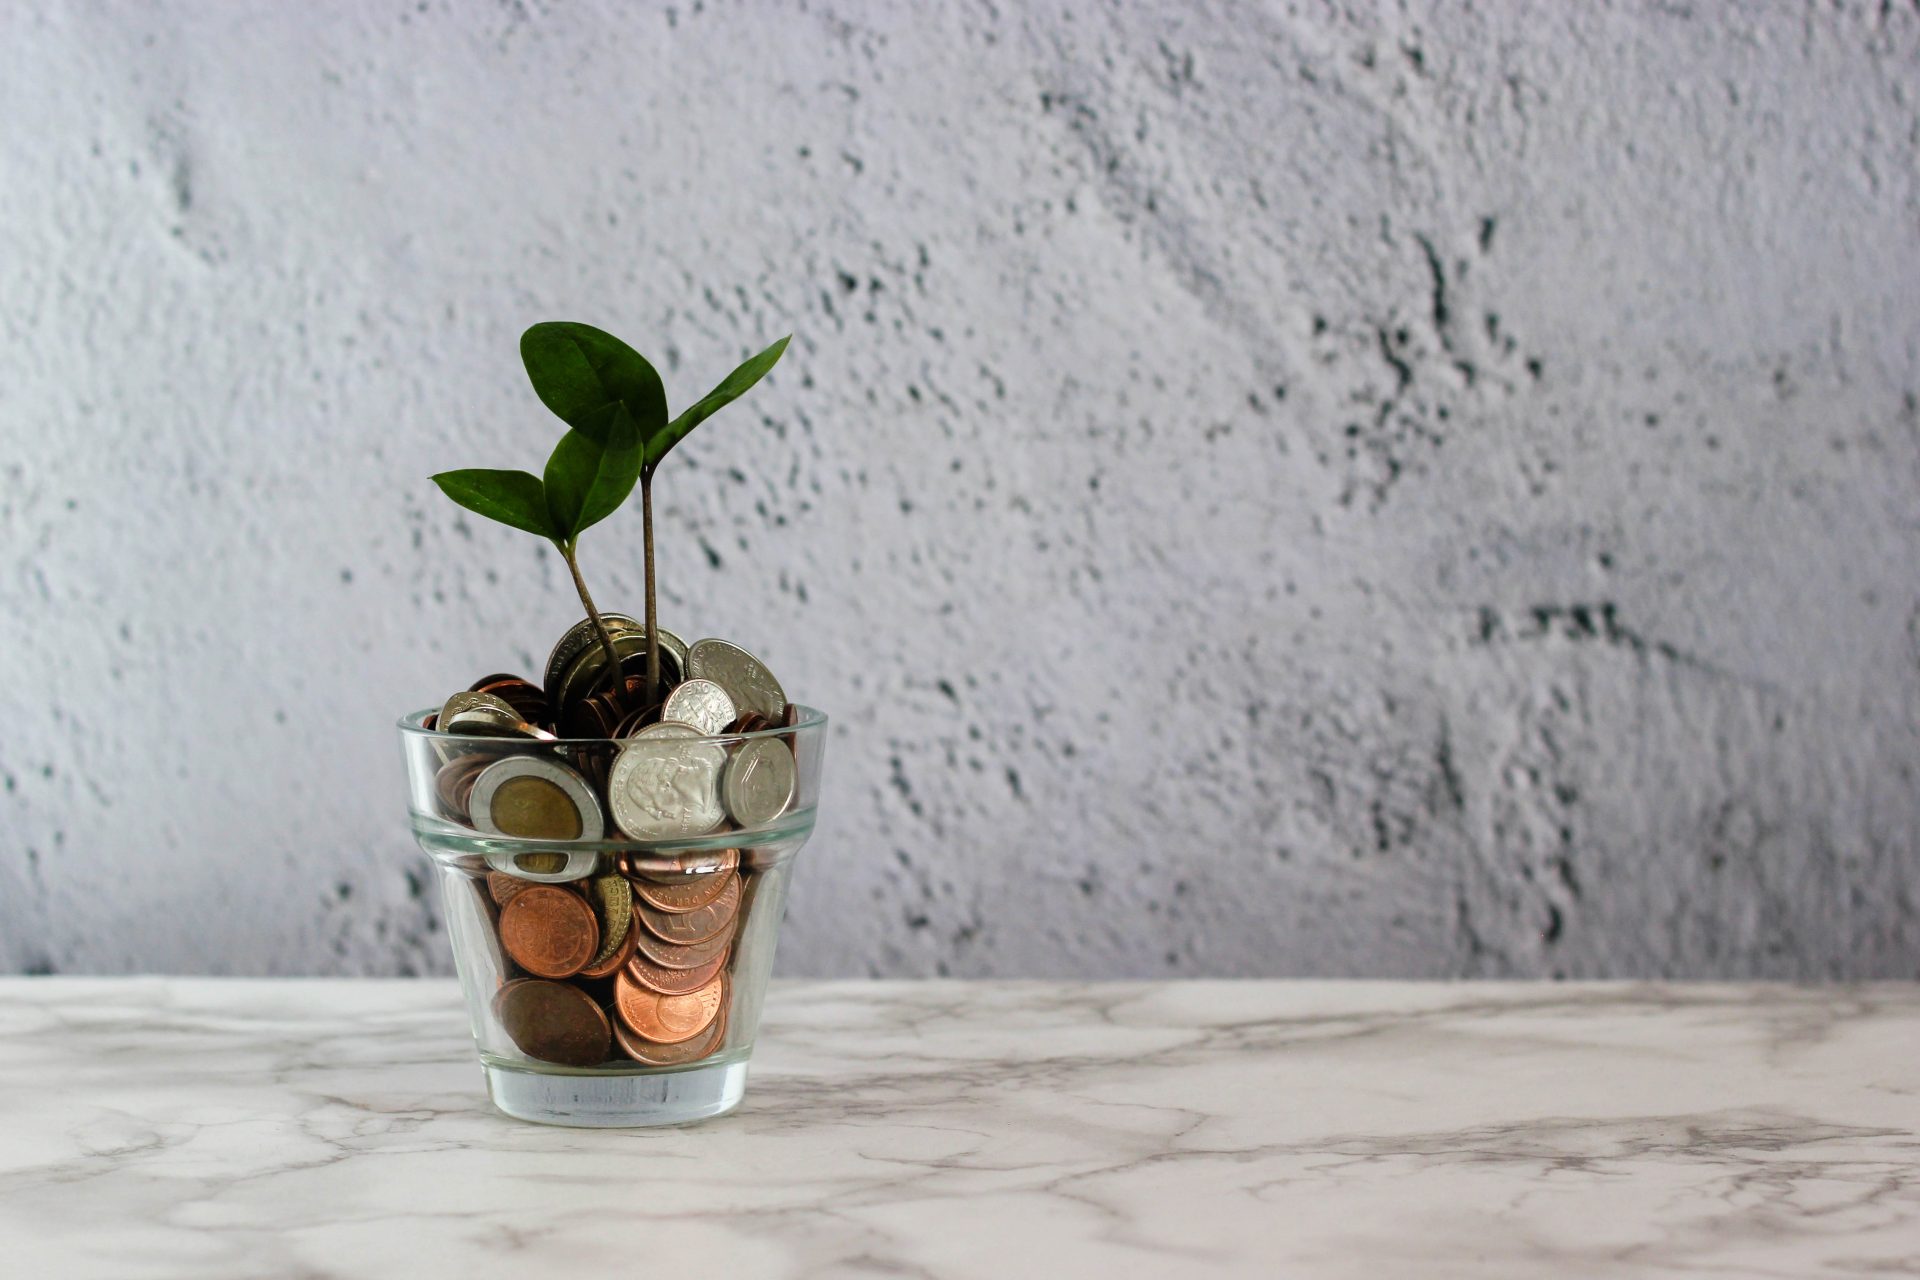  A glass jar filled with pennies and two small plants growing out of it, symbolizing the growth of savings over time with consistency.